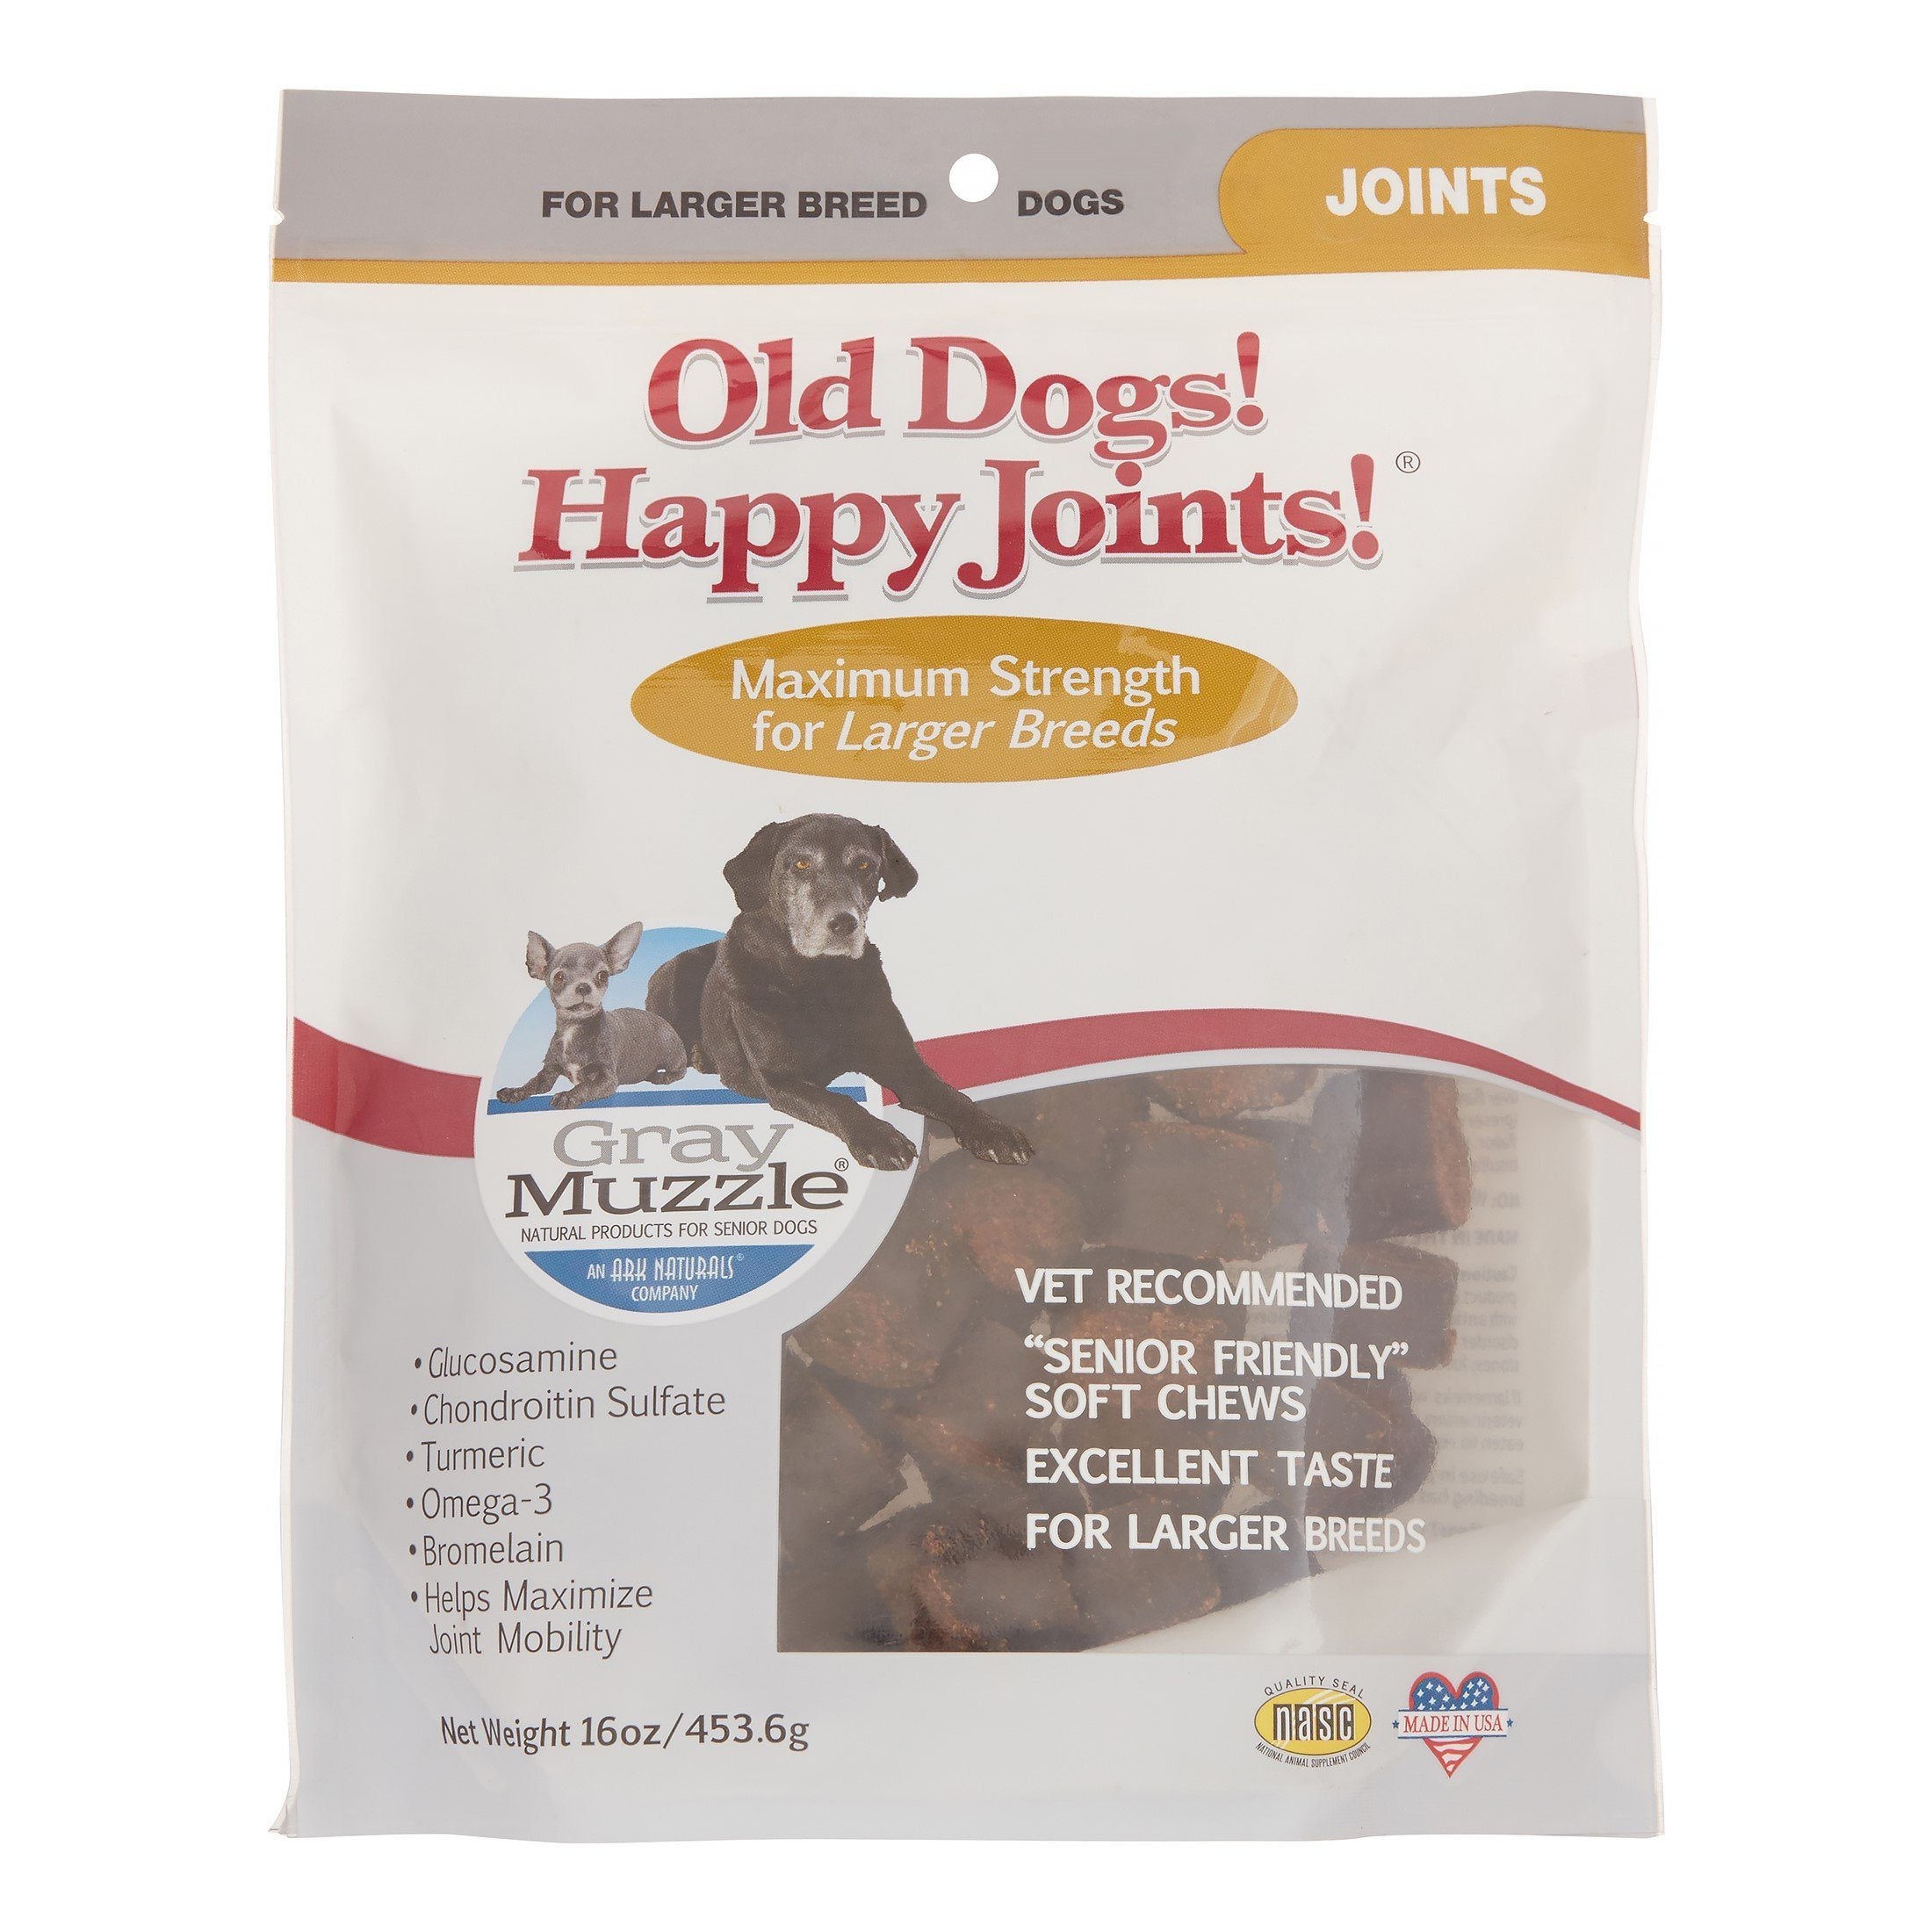 Ark Natural's Old Dog! Happy Joints! Maximum Strength Soft and Chewy Dog Treats - 16 oz Bag  